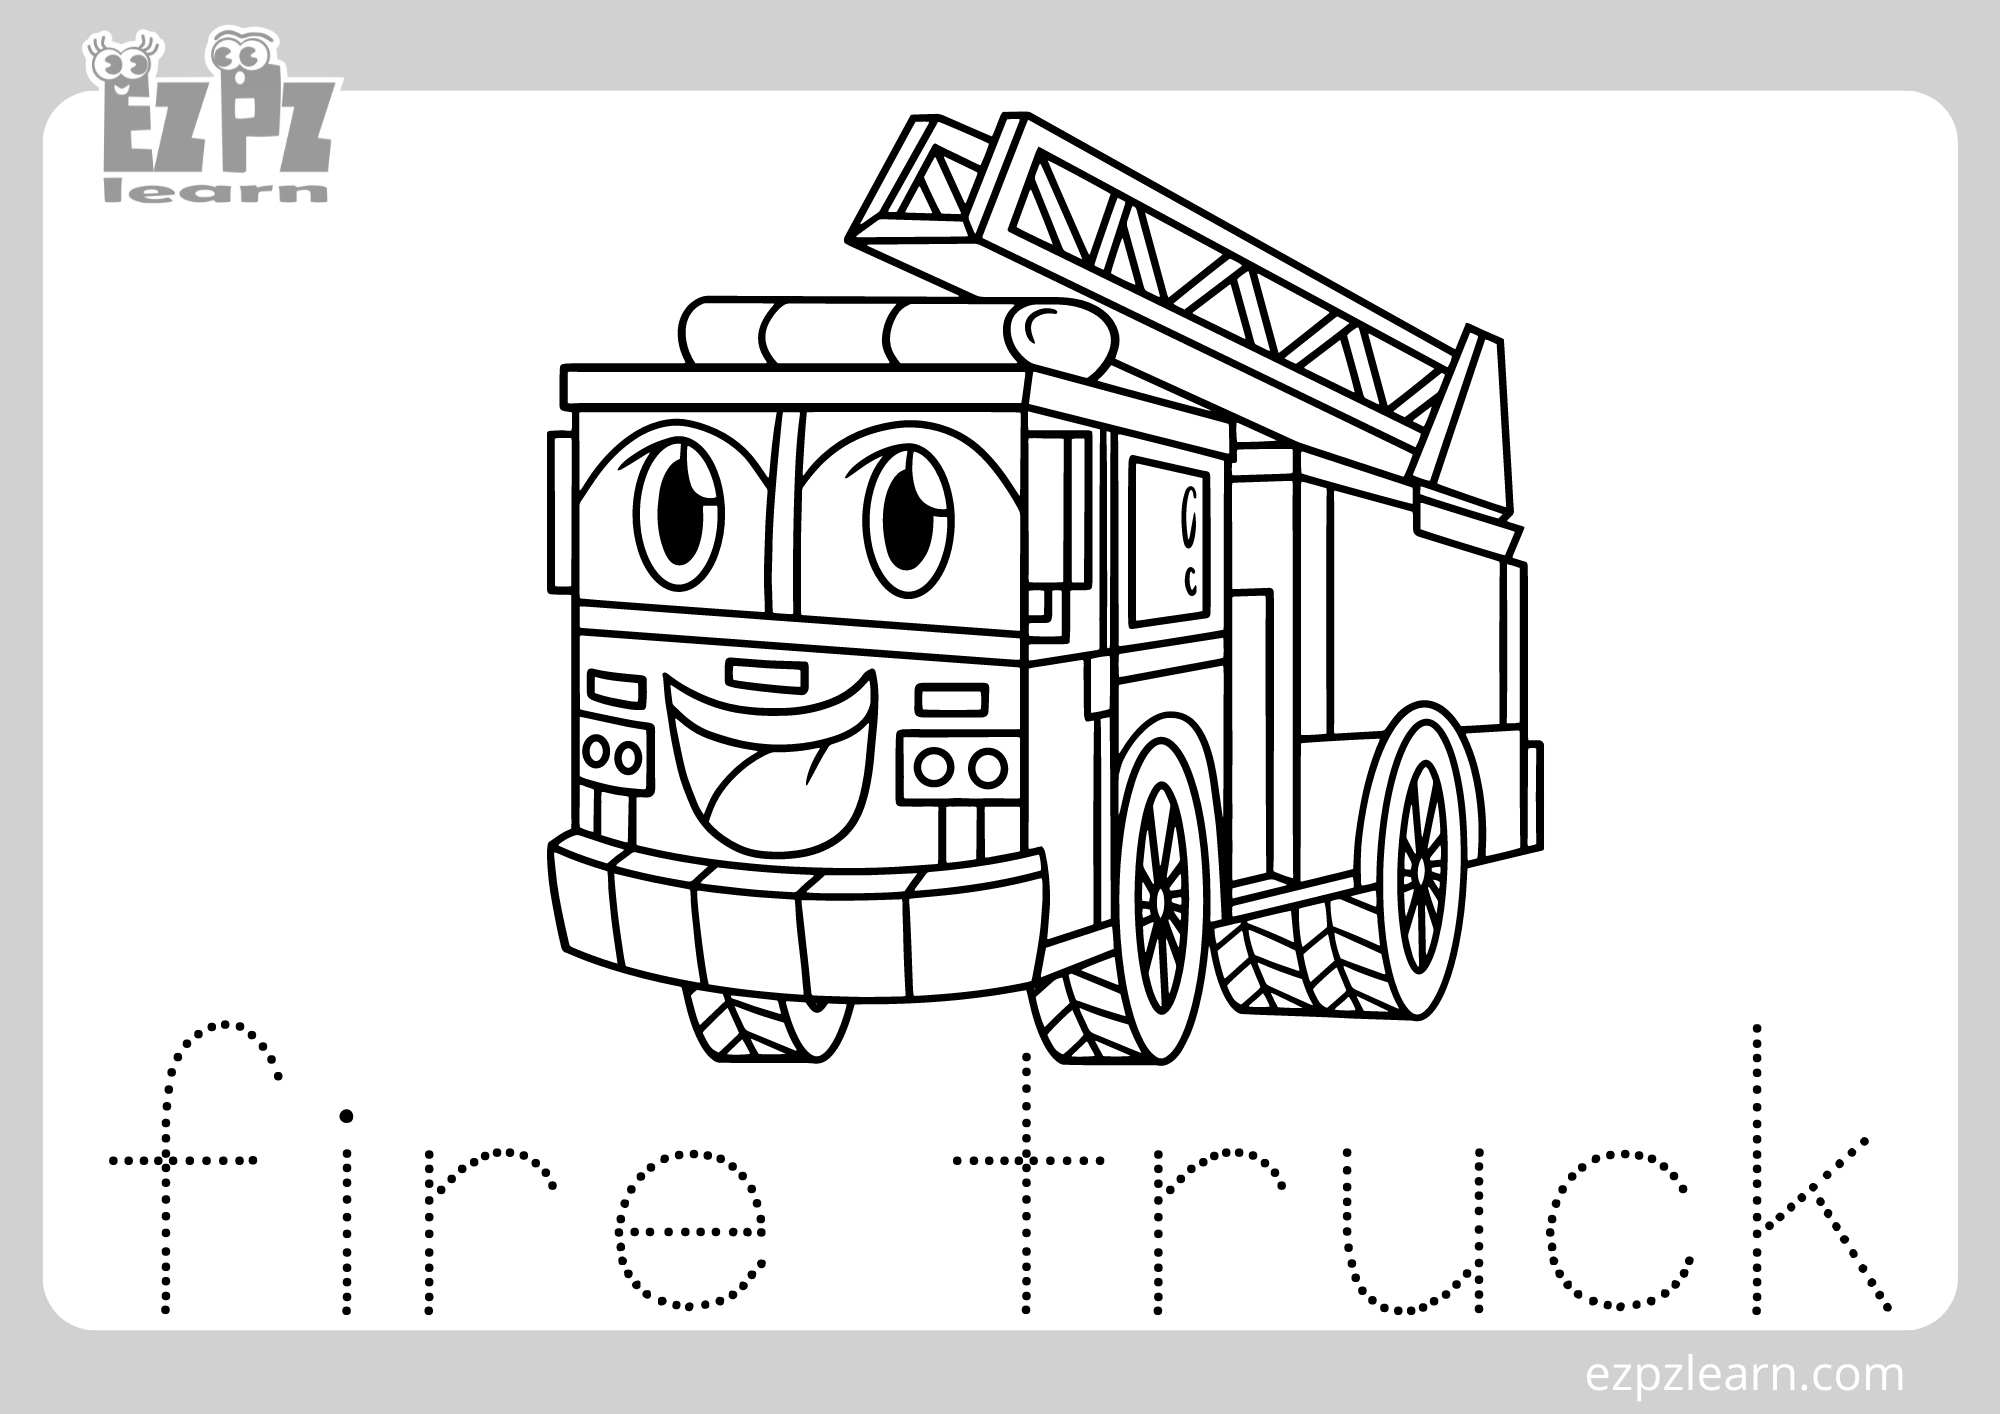 Printable Fire Station Coloring Pages Free For Kids And Adults